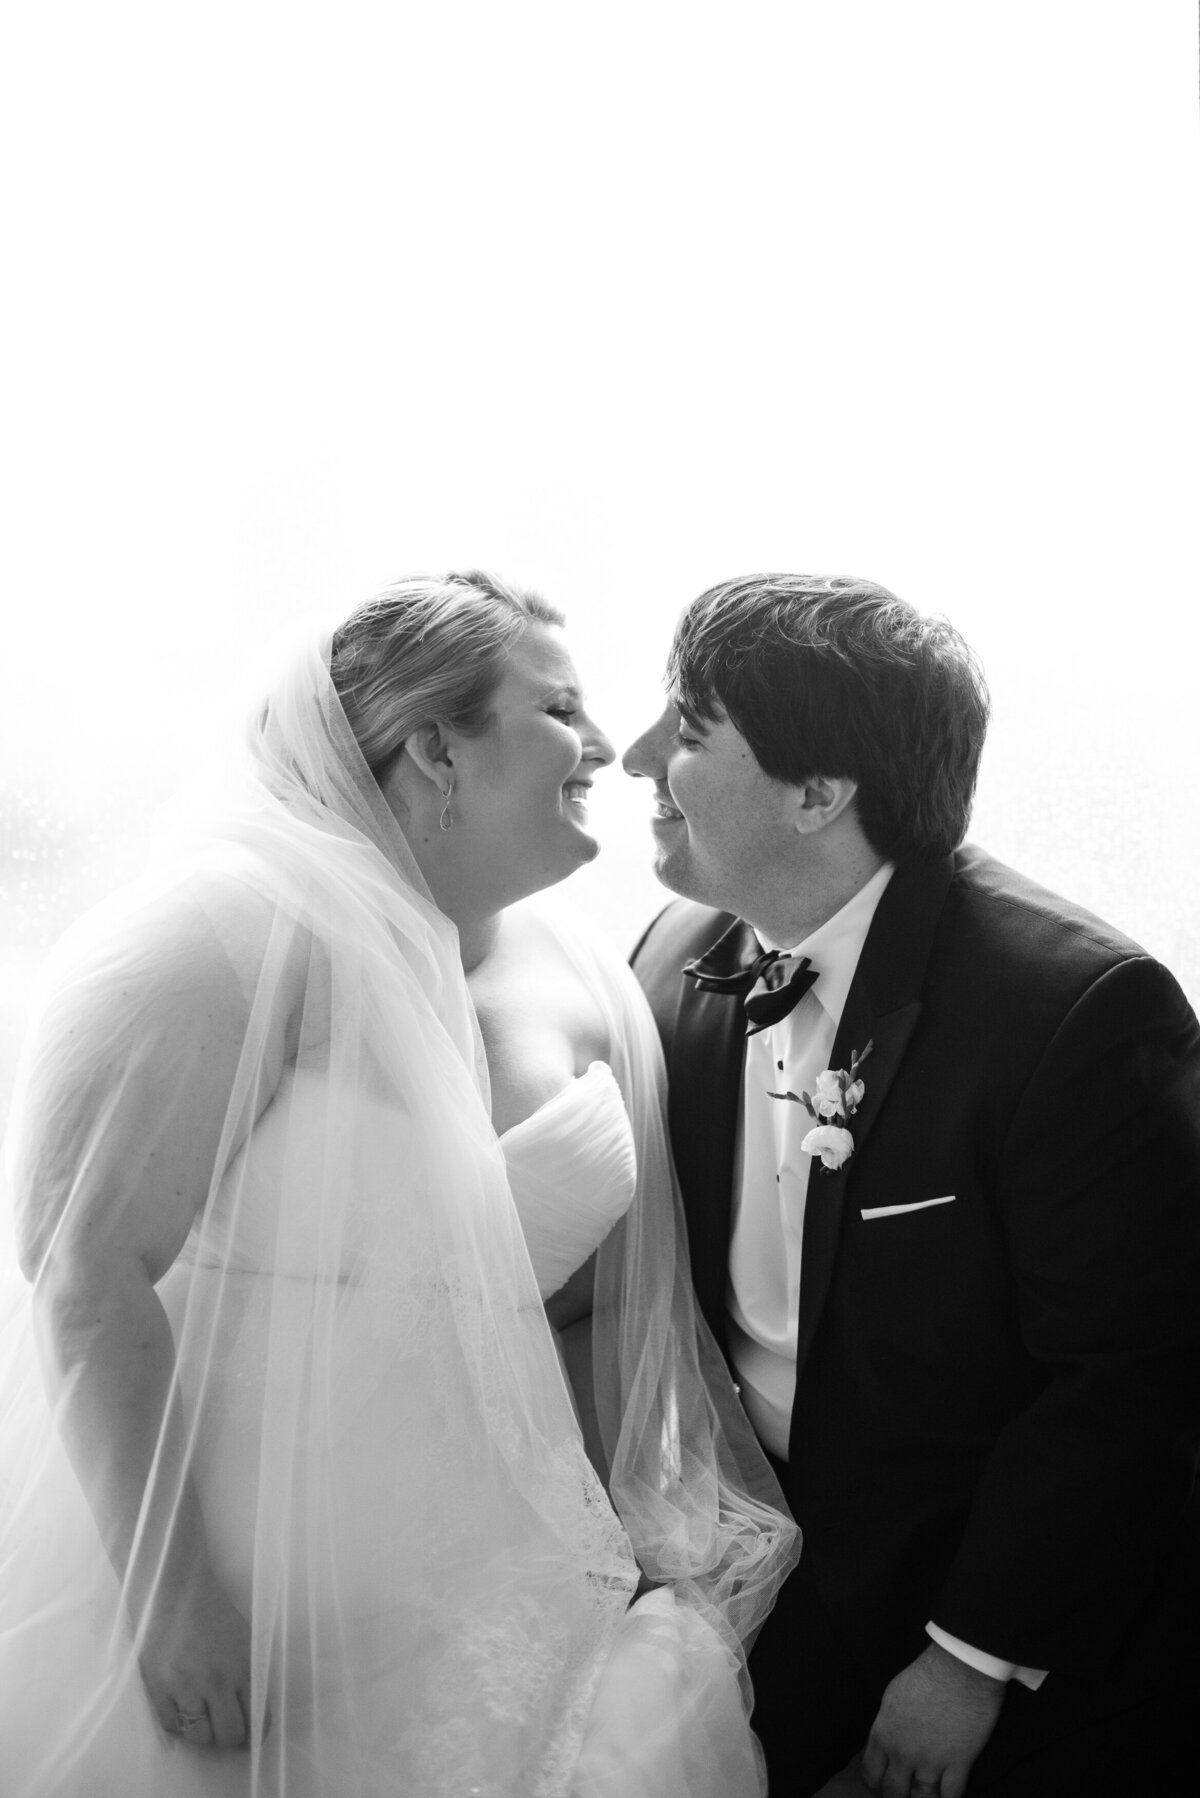 A bride and groom sitting next to each other about to kiss.